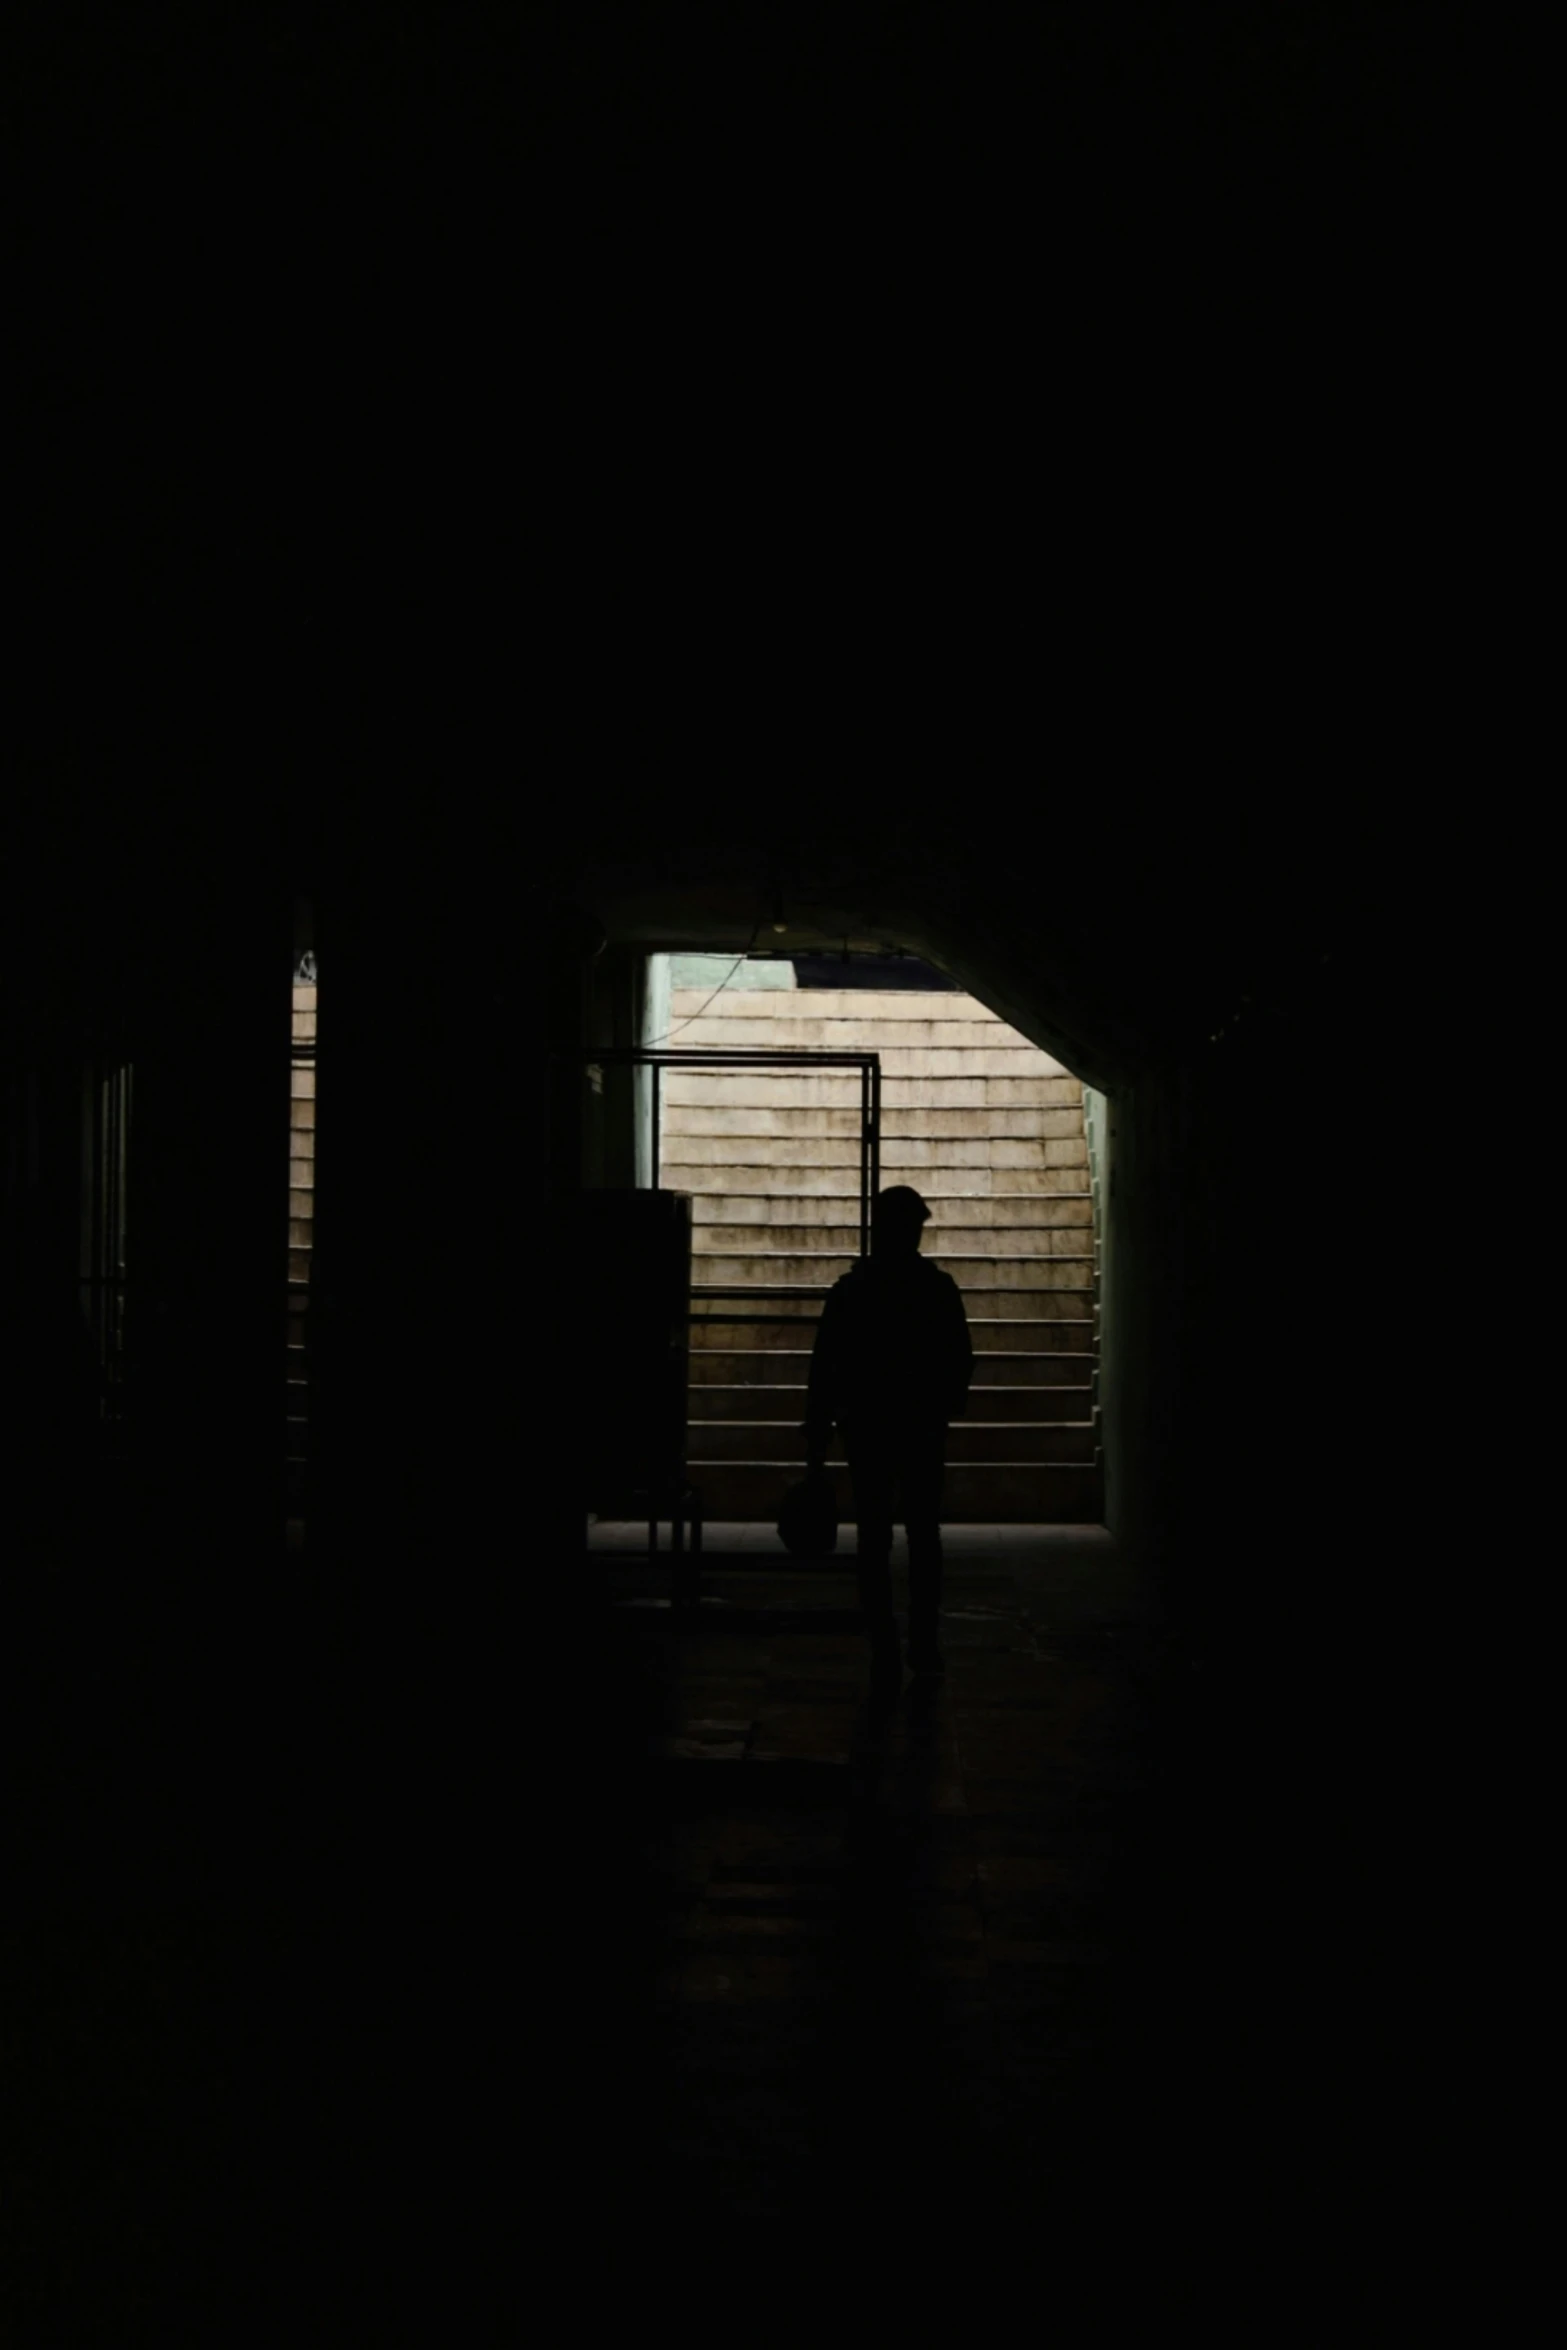 two people are silhouetted against a dark doorway